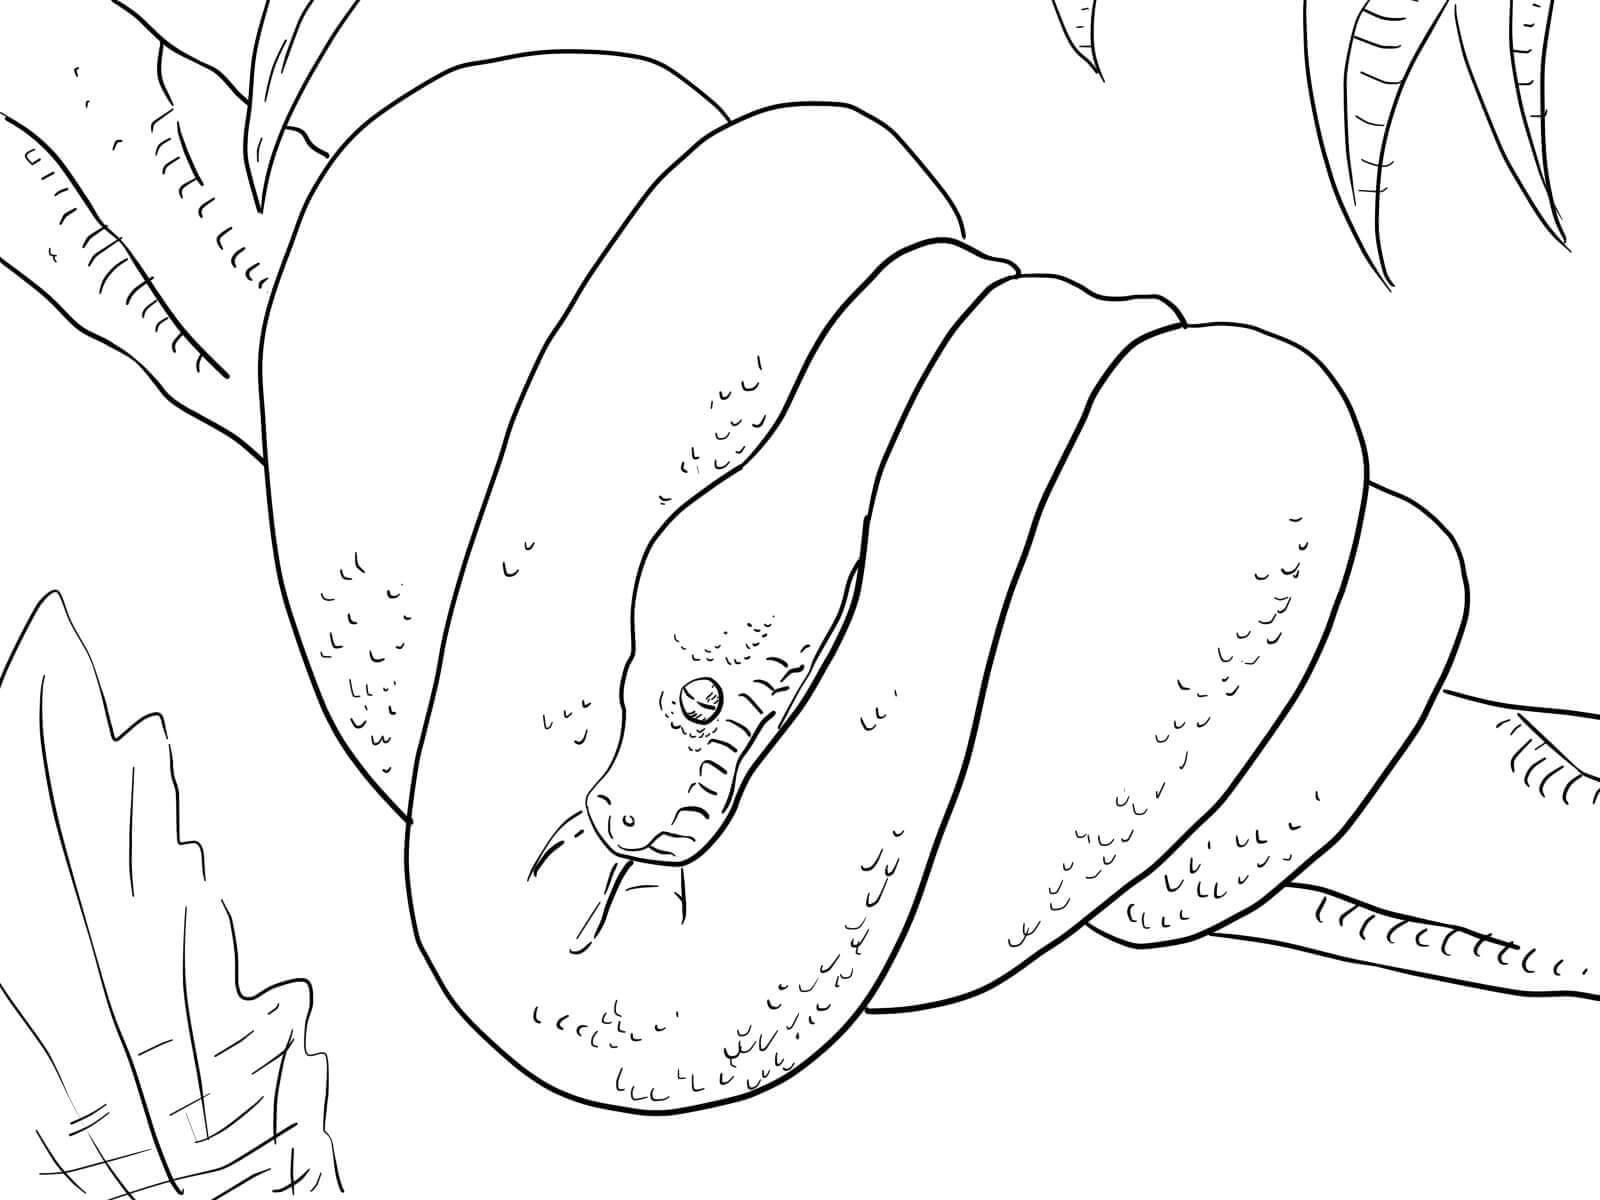 Big Python On The Tree Coloring Page - Free Printable Coloring Pages